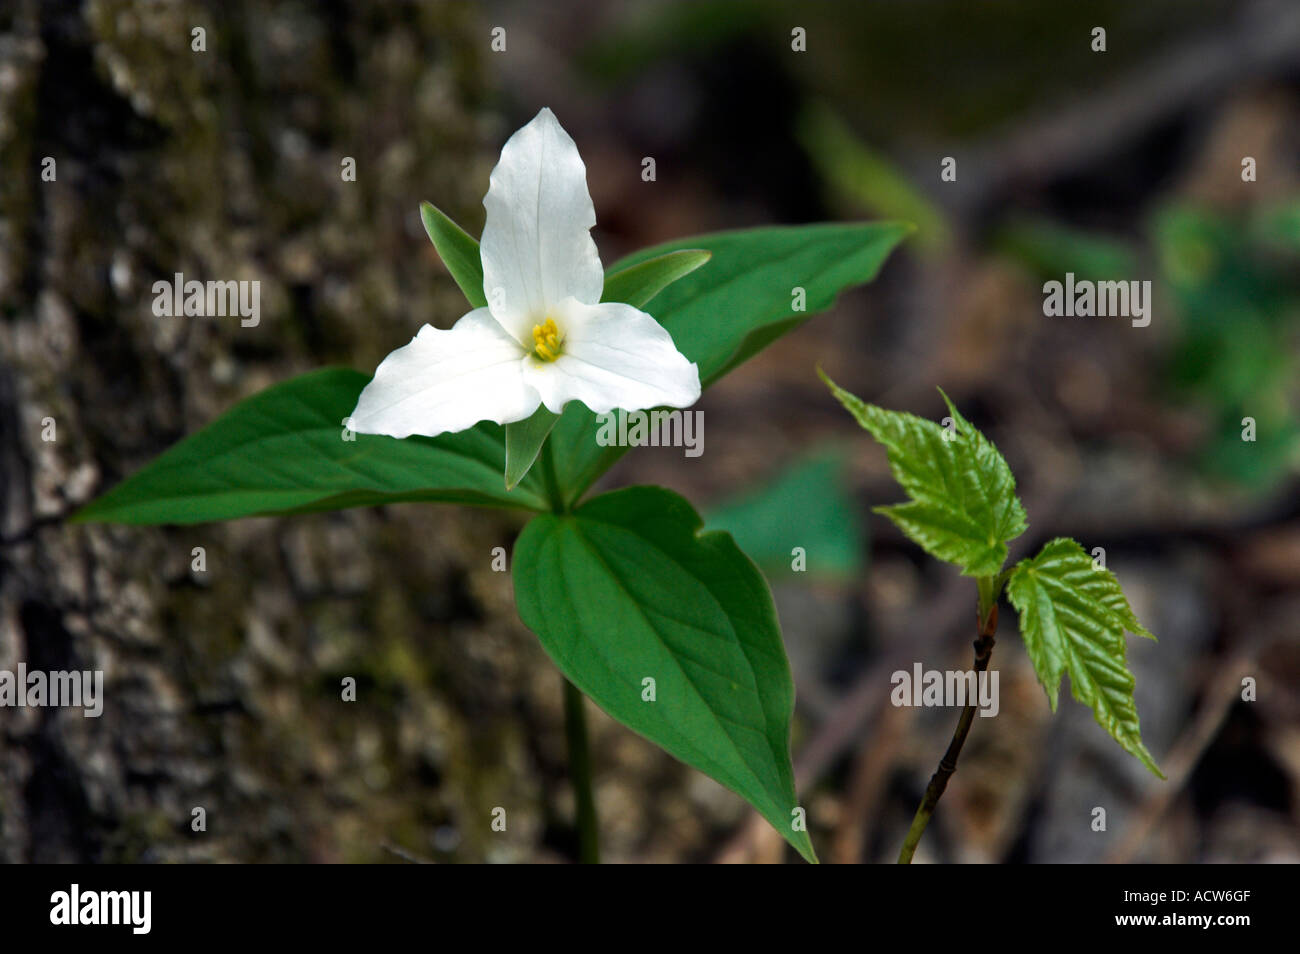 A white trillium portrait in the forests of The Great Smoky Mountain National Park, North Carolina, USA, America Stock Photo